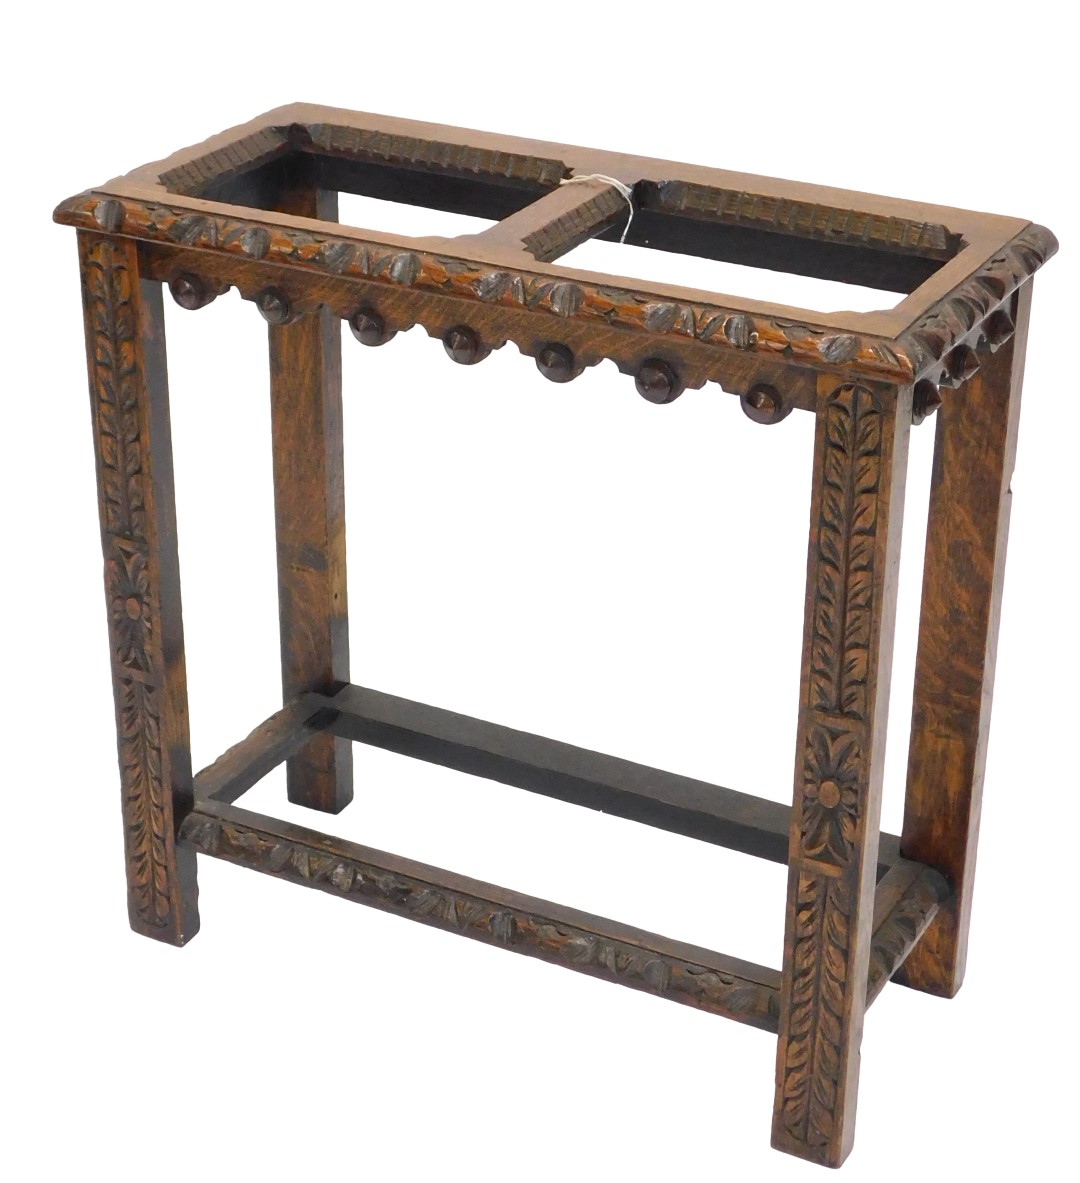 An early 20thC carved oak umbrella stand, with two divisions, lacking liner, 59.5cm wide.